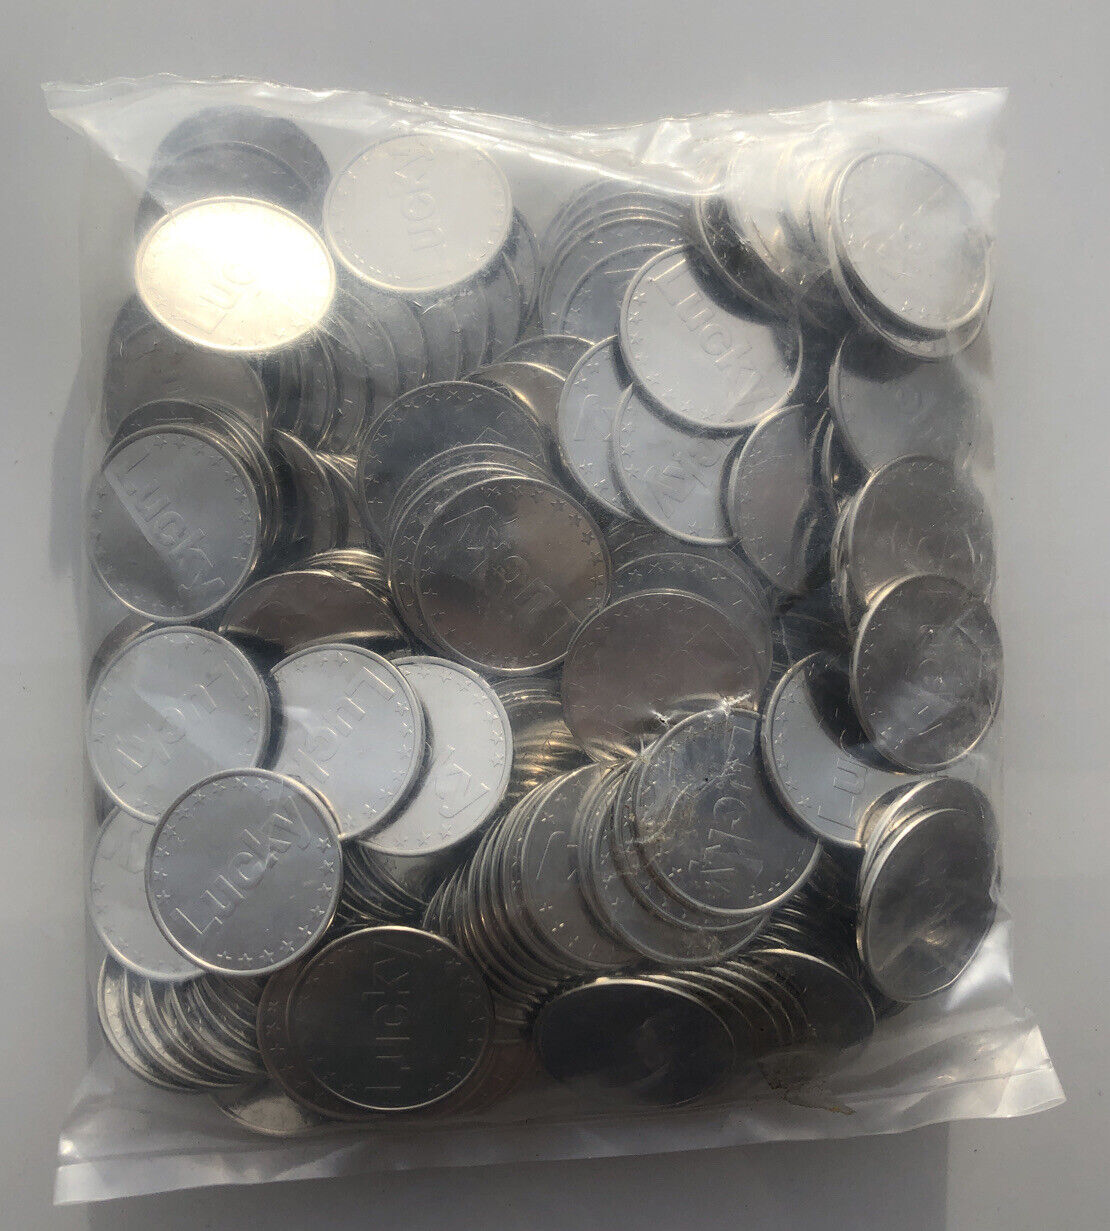 Lot of 250) Silver 30mm 50 Cent Pachislo Slot Machine Tokens Half Dollar IGT